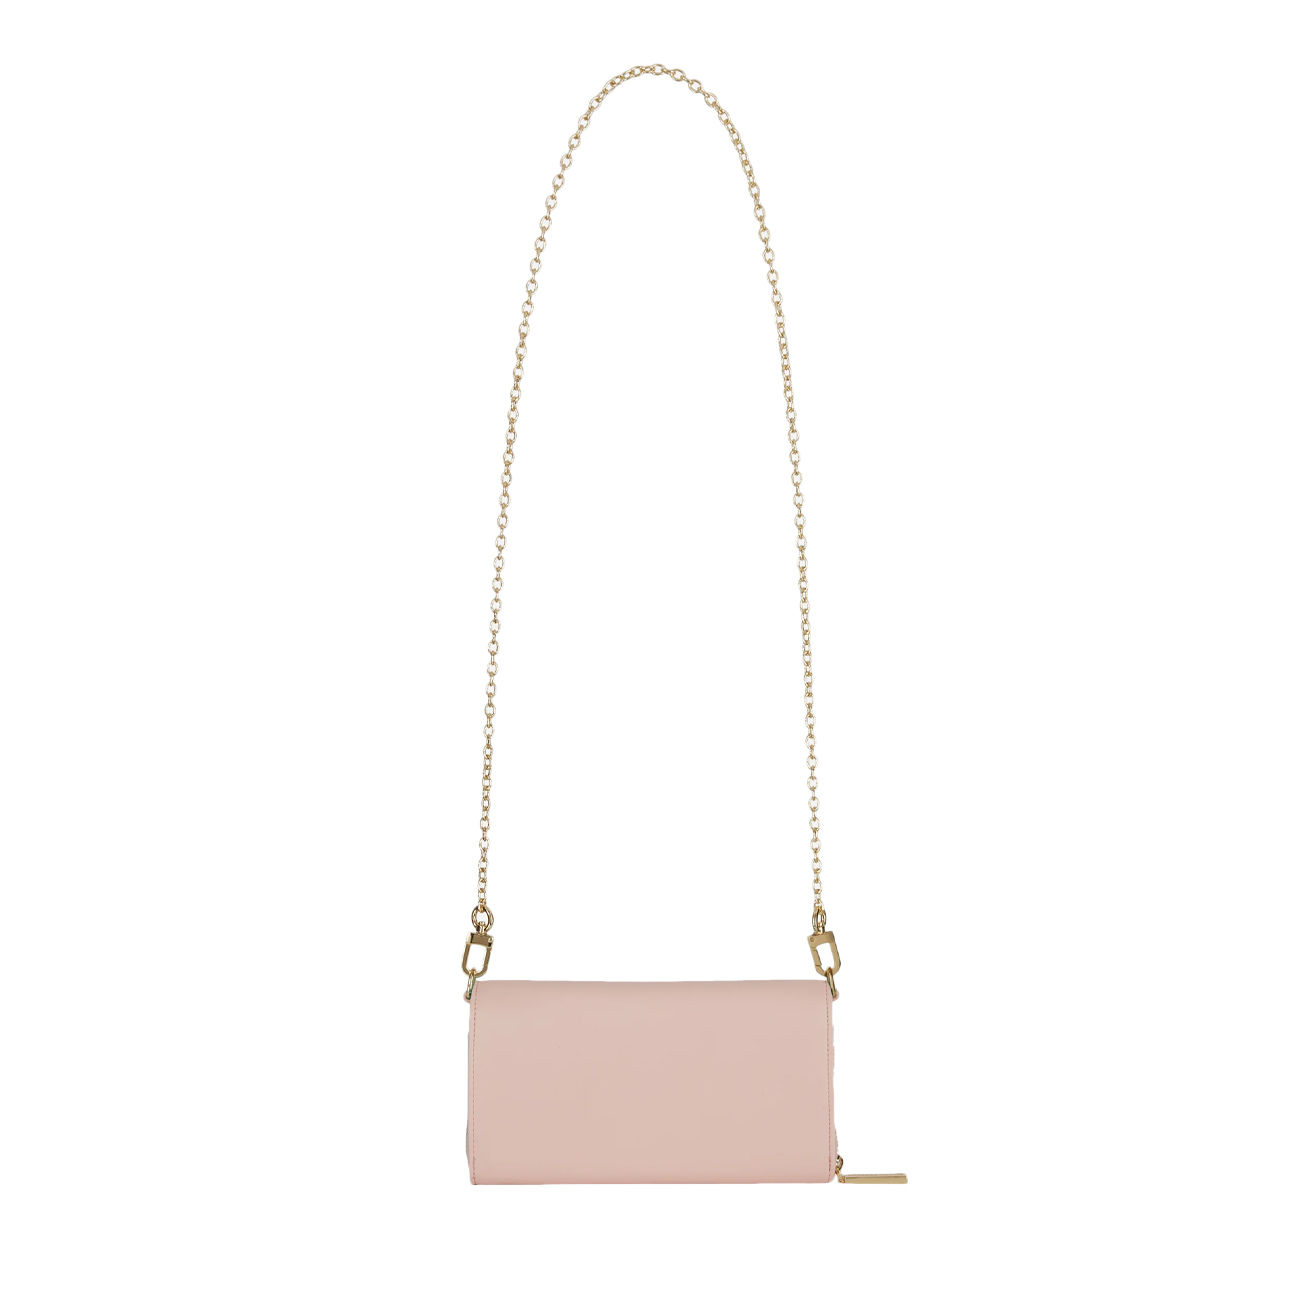 MICHAEL KORS: Michael chain clutch in hammered leather - Blush Pink